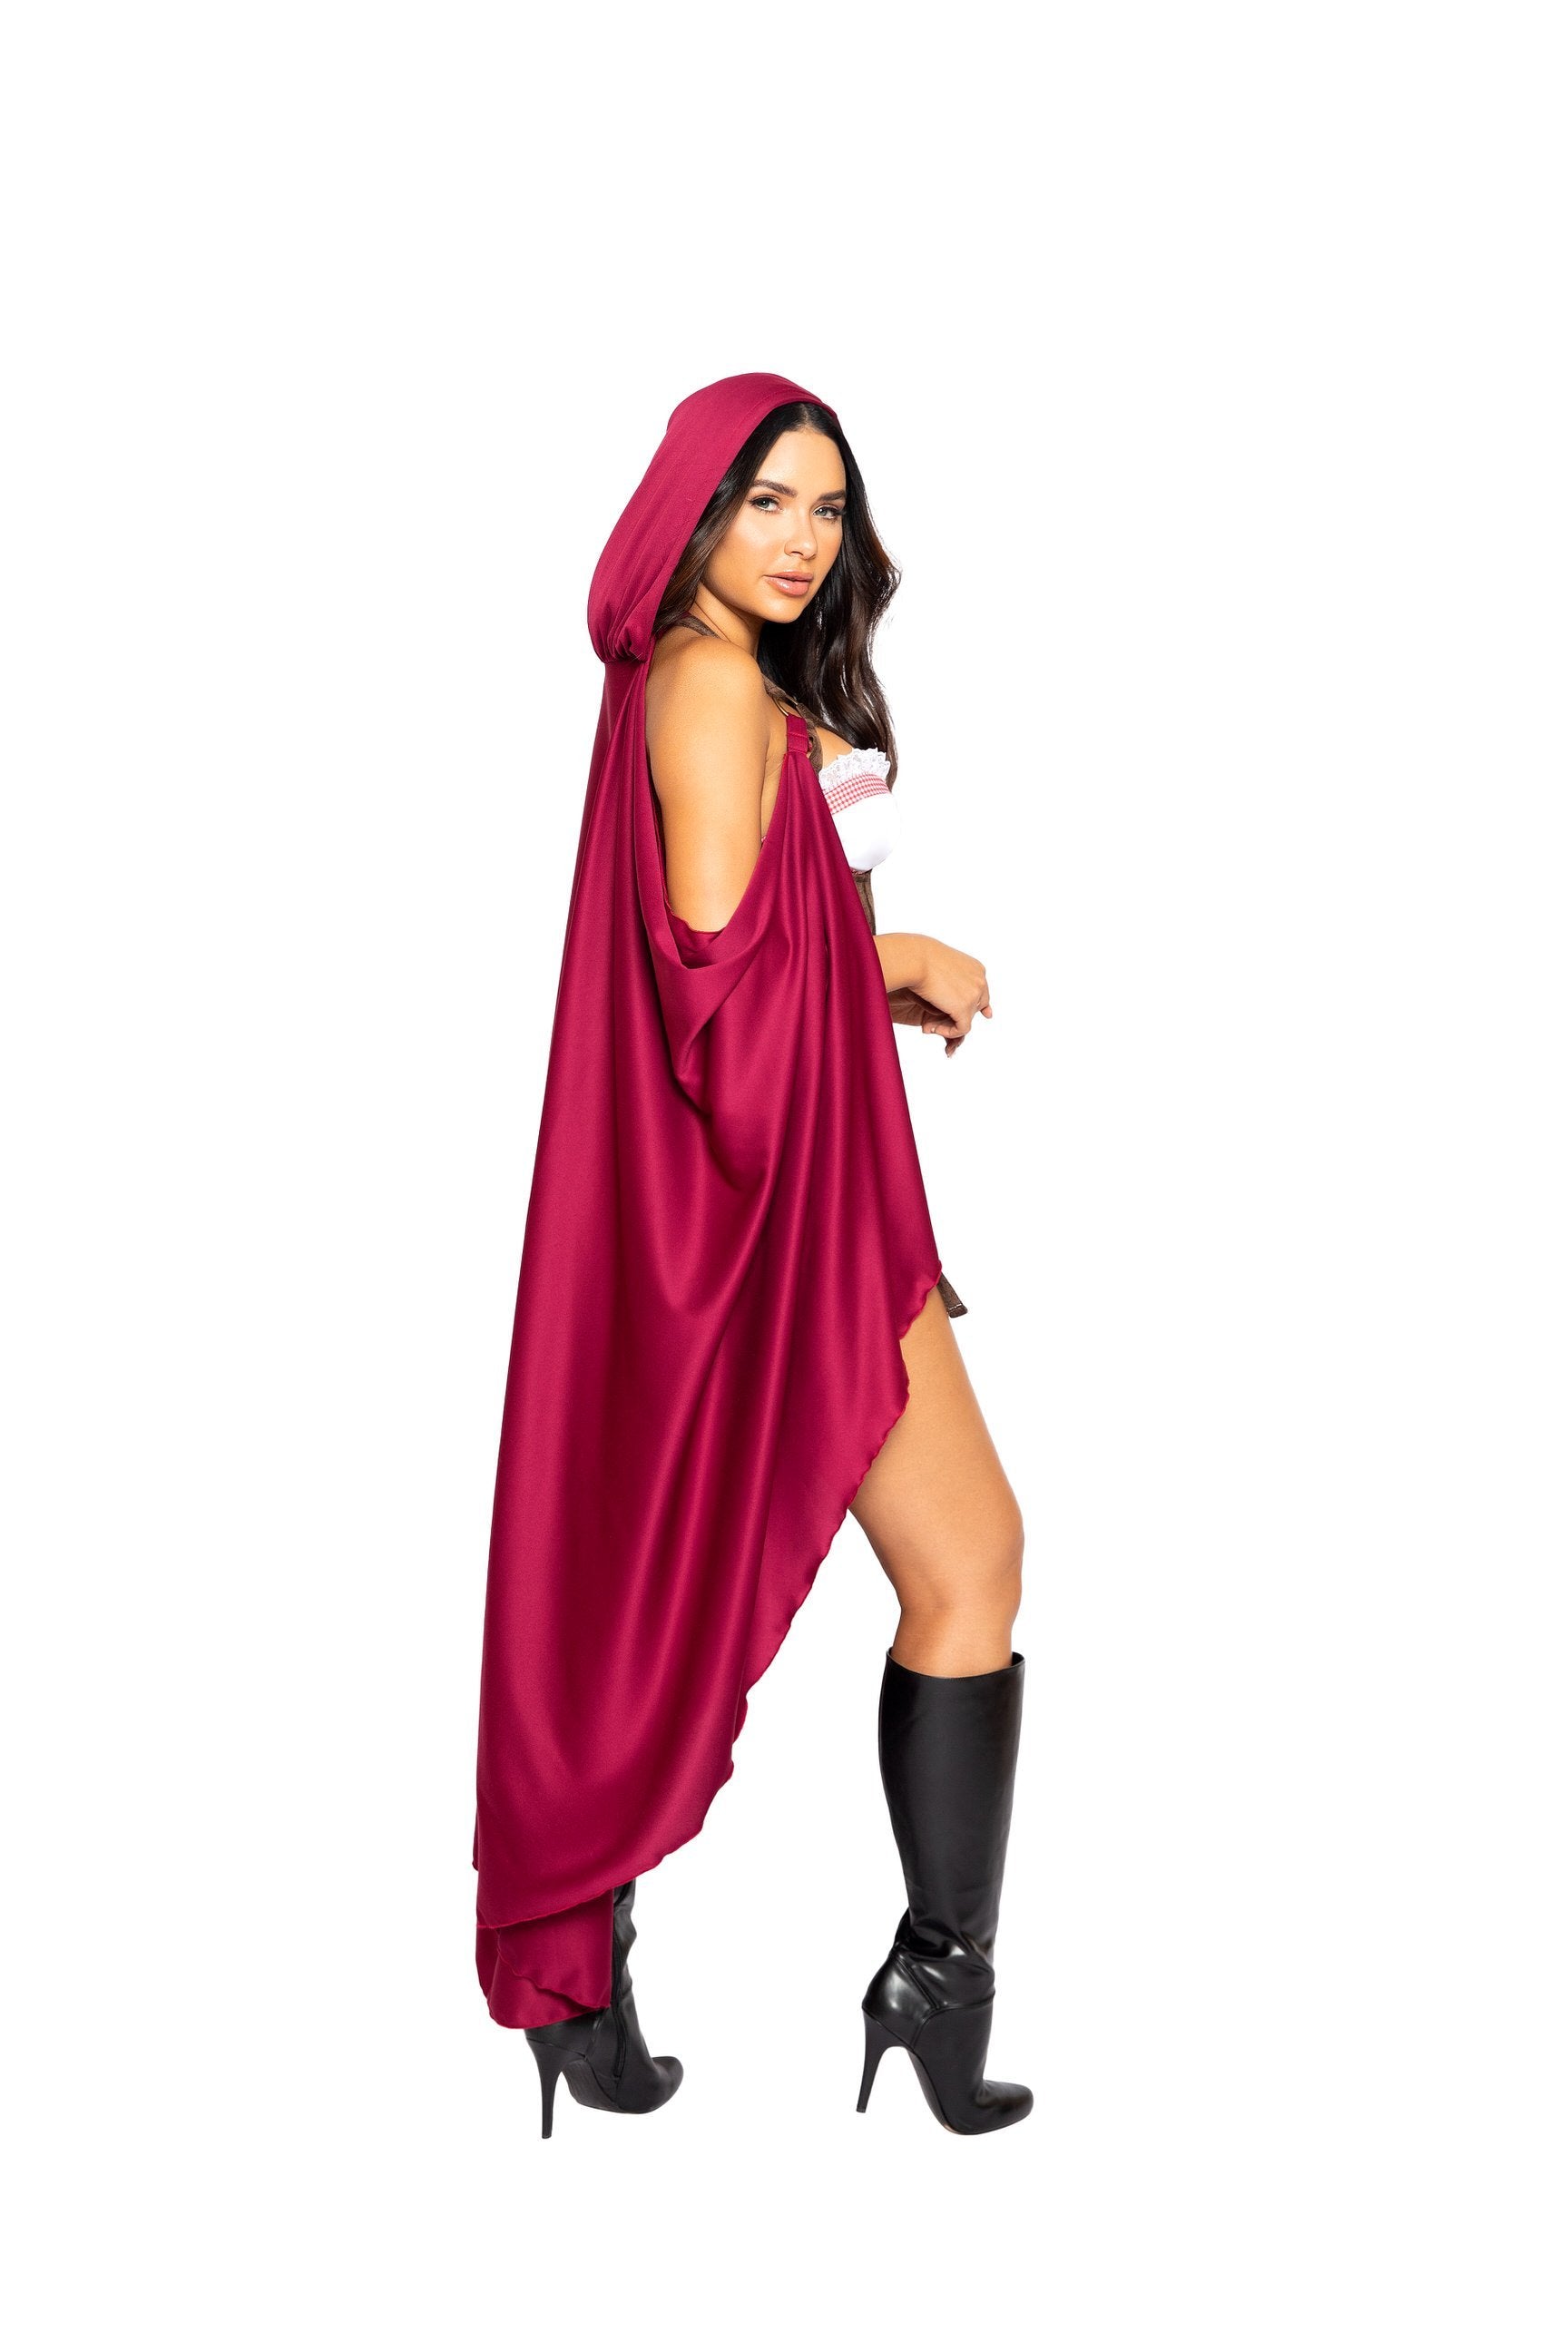 Roma Costume Costumes Small / Burgundy/Brown 4994 - 2pc Red Riding Hood